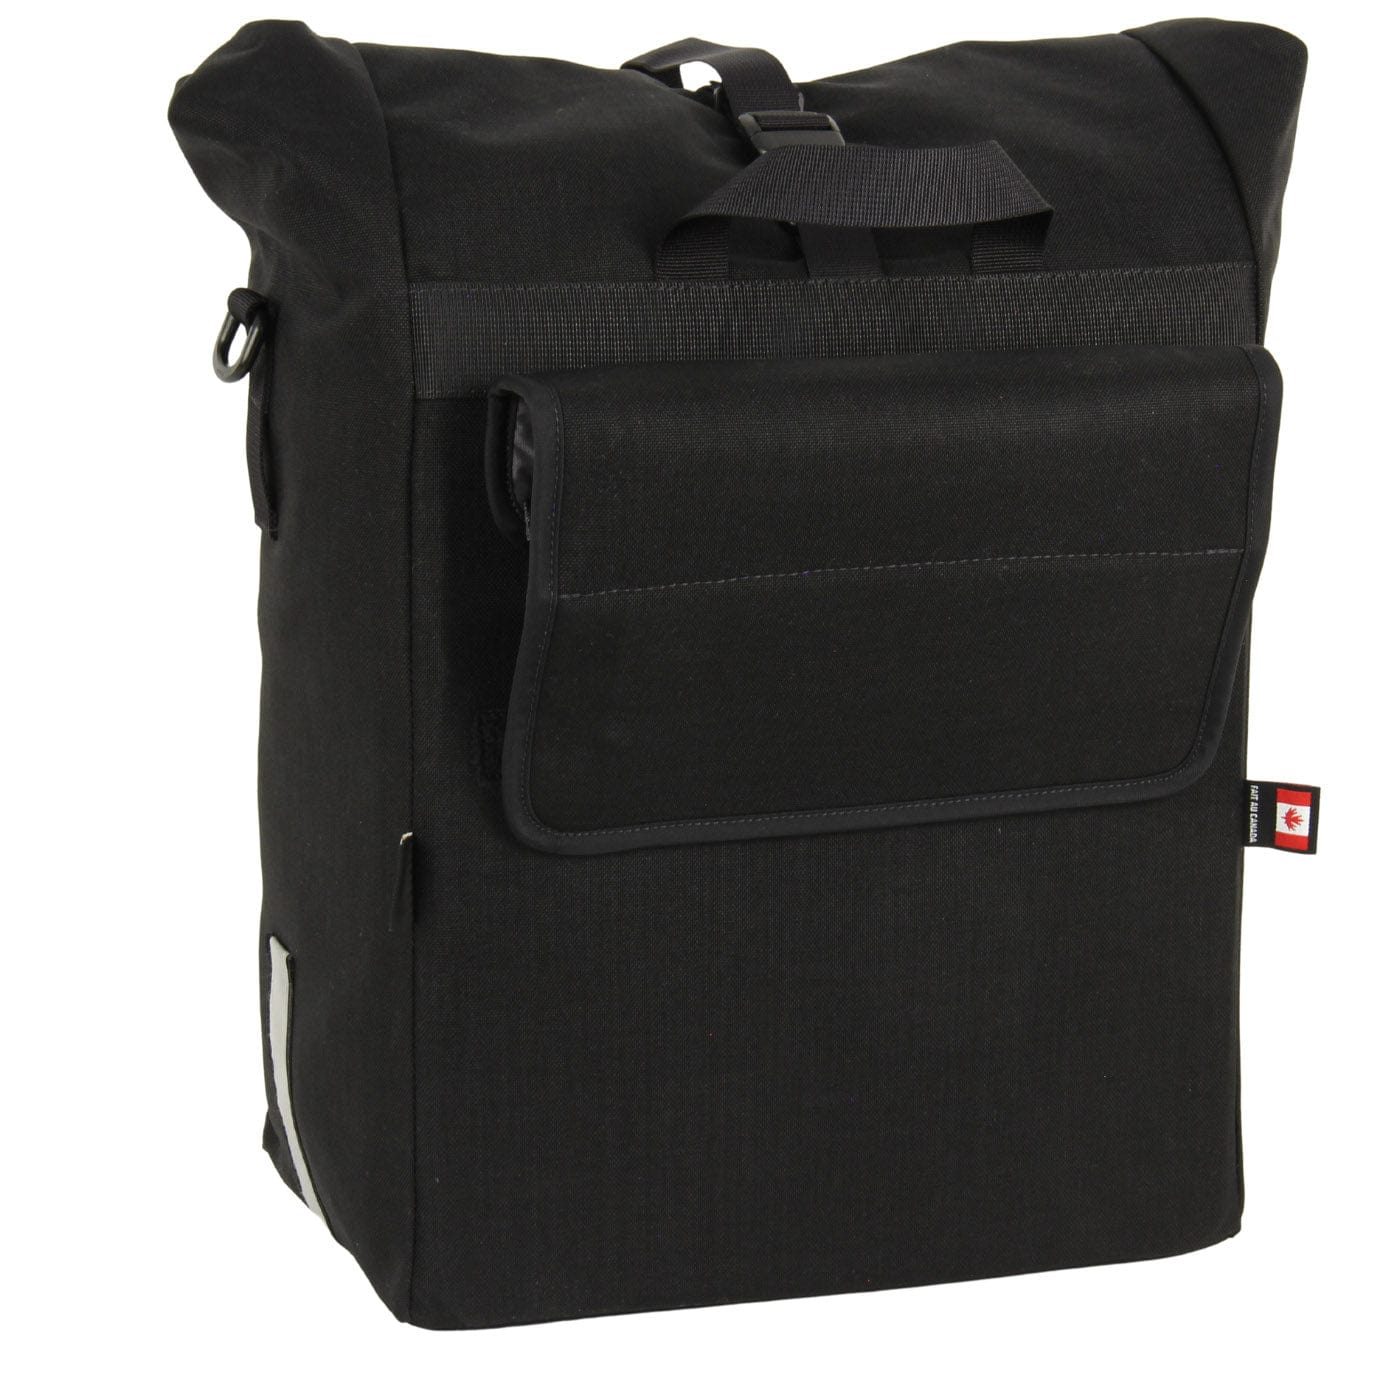 Signature V waterproof urban laptop pannier with mounting system covered with padded flap for added comfort when pannier is carried with shoulder strap